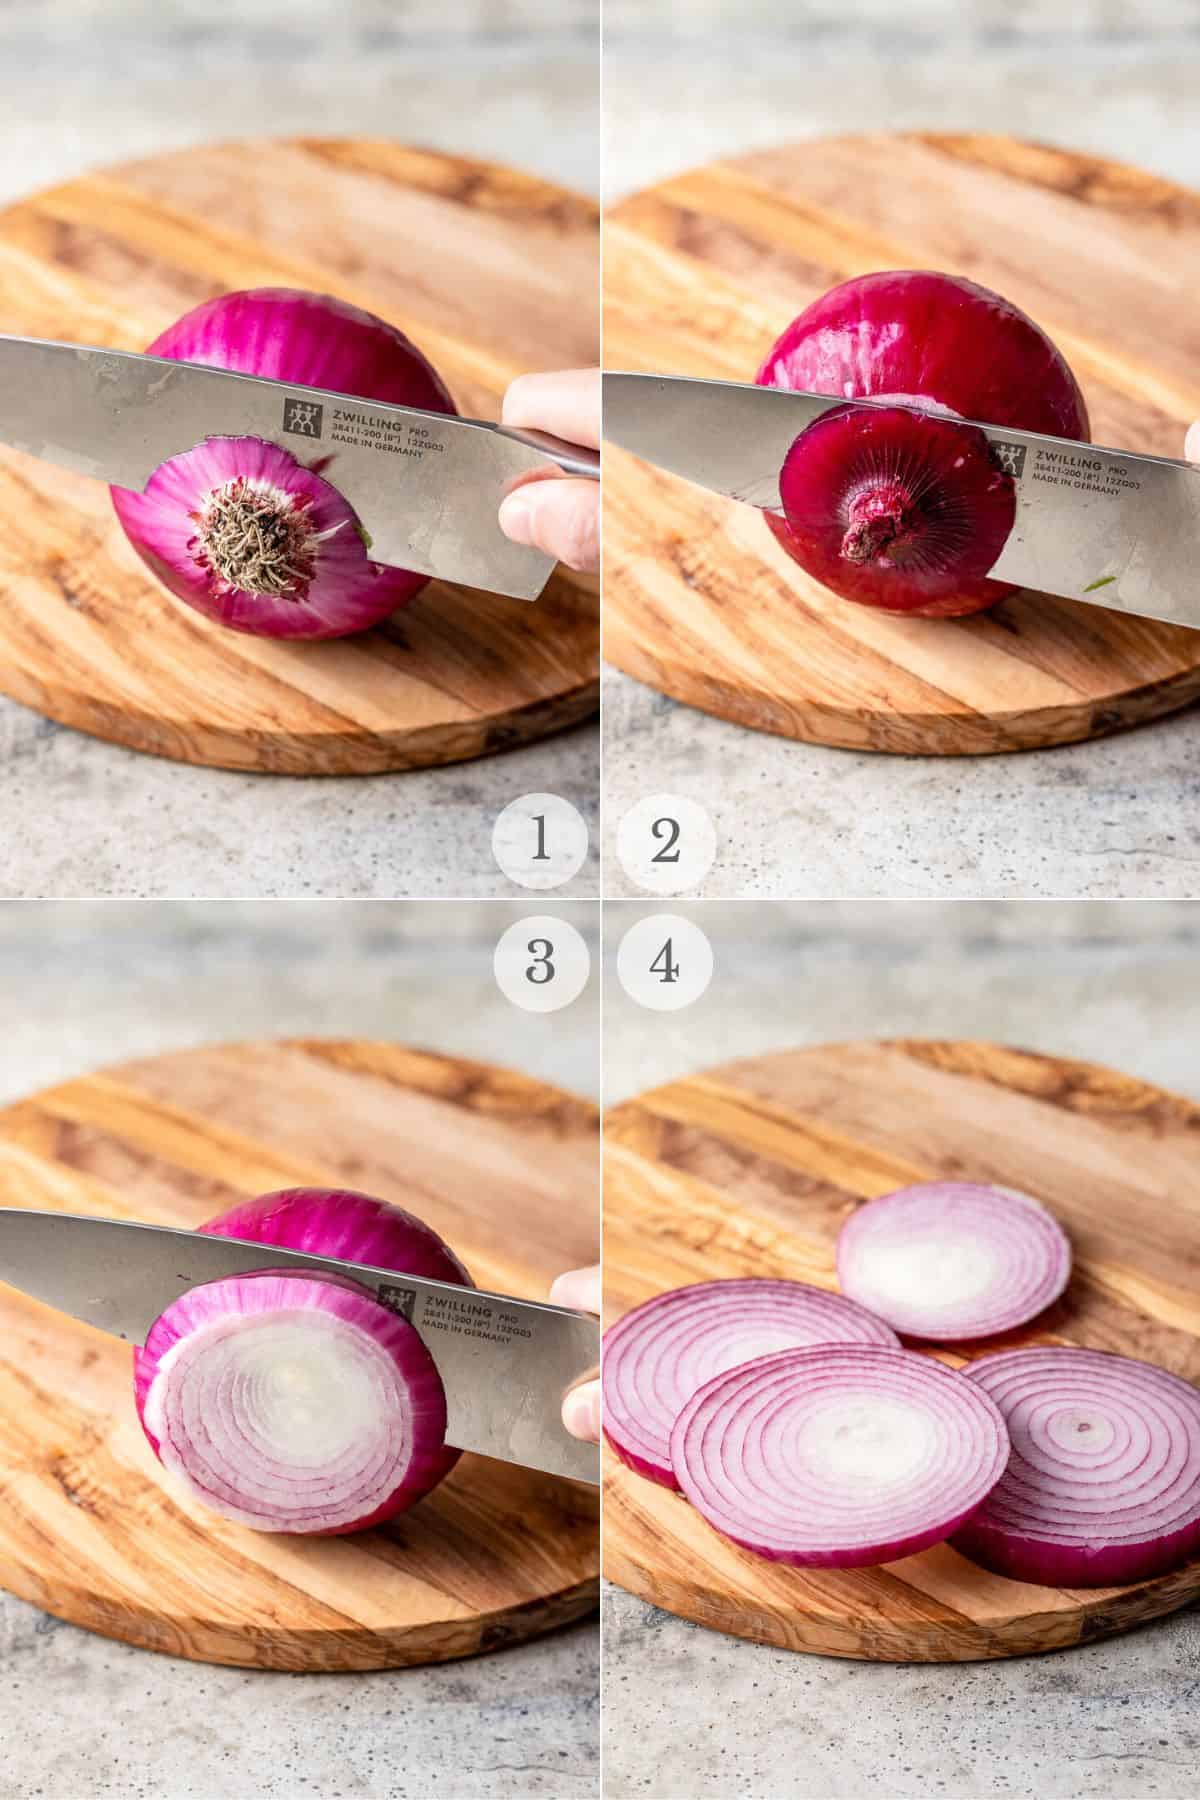 how to cut red onion for grilling steps.